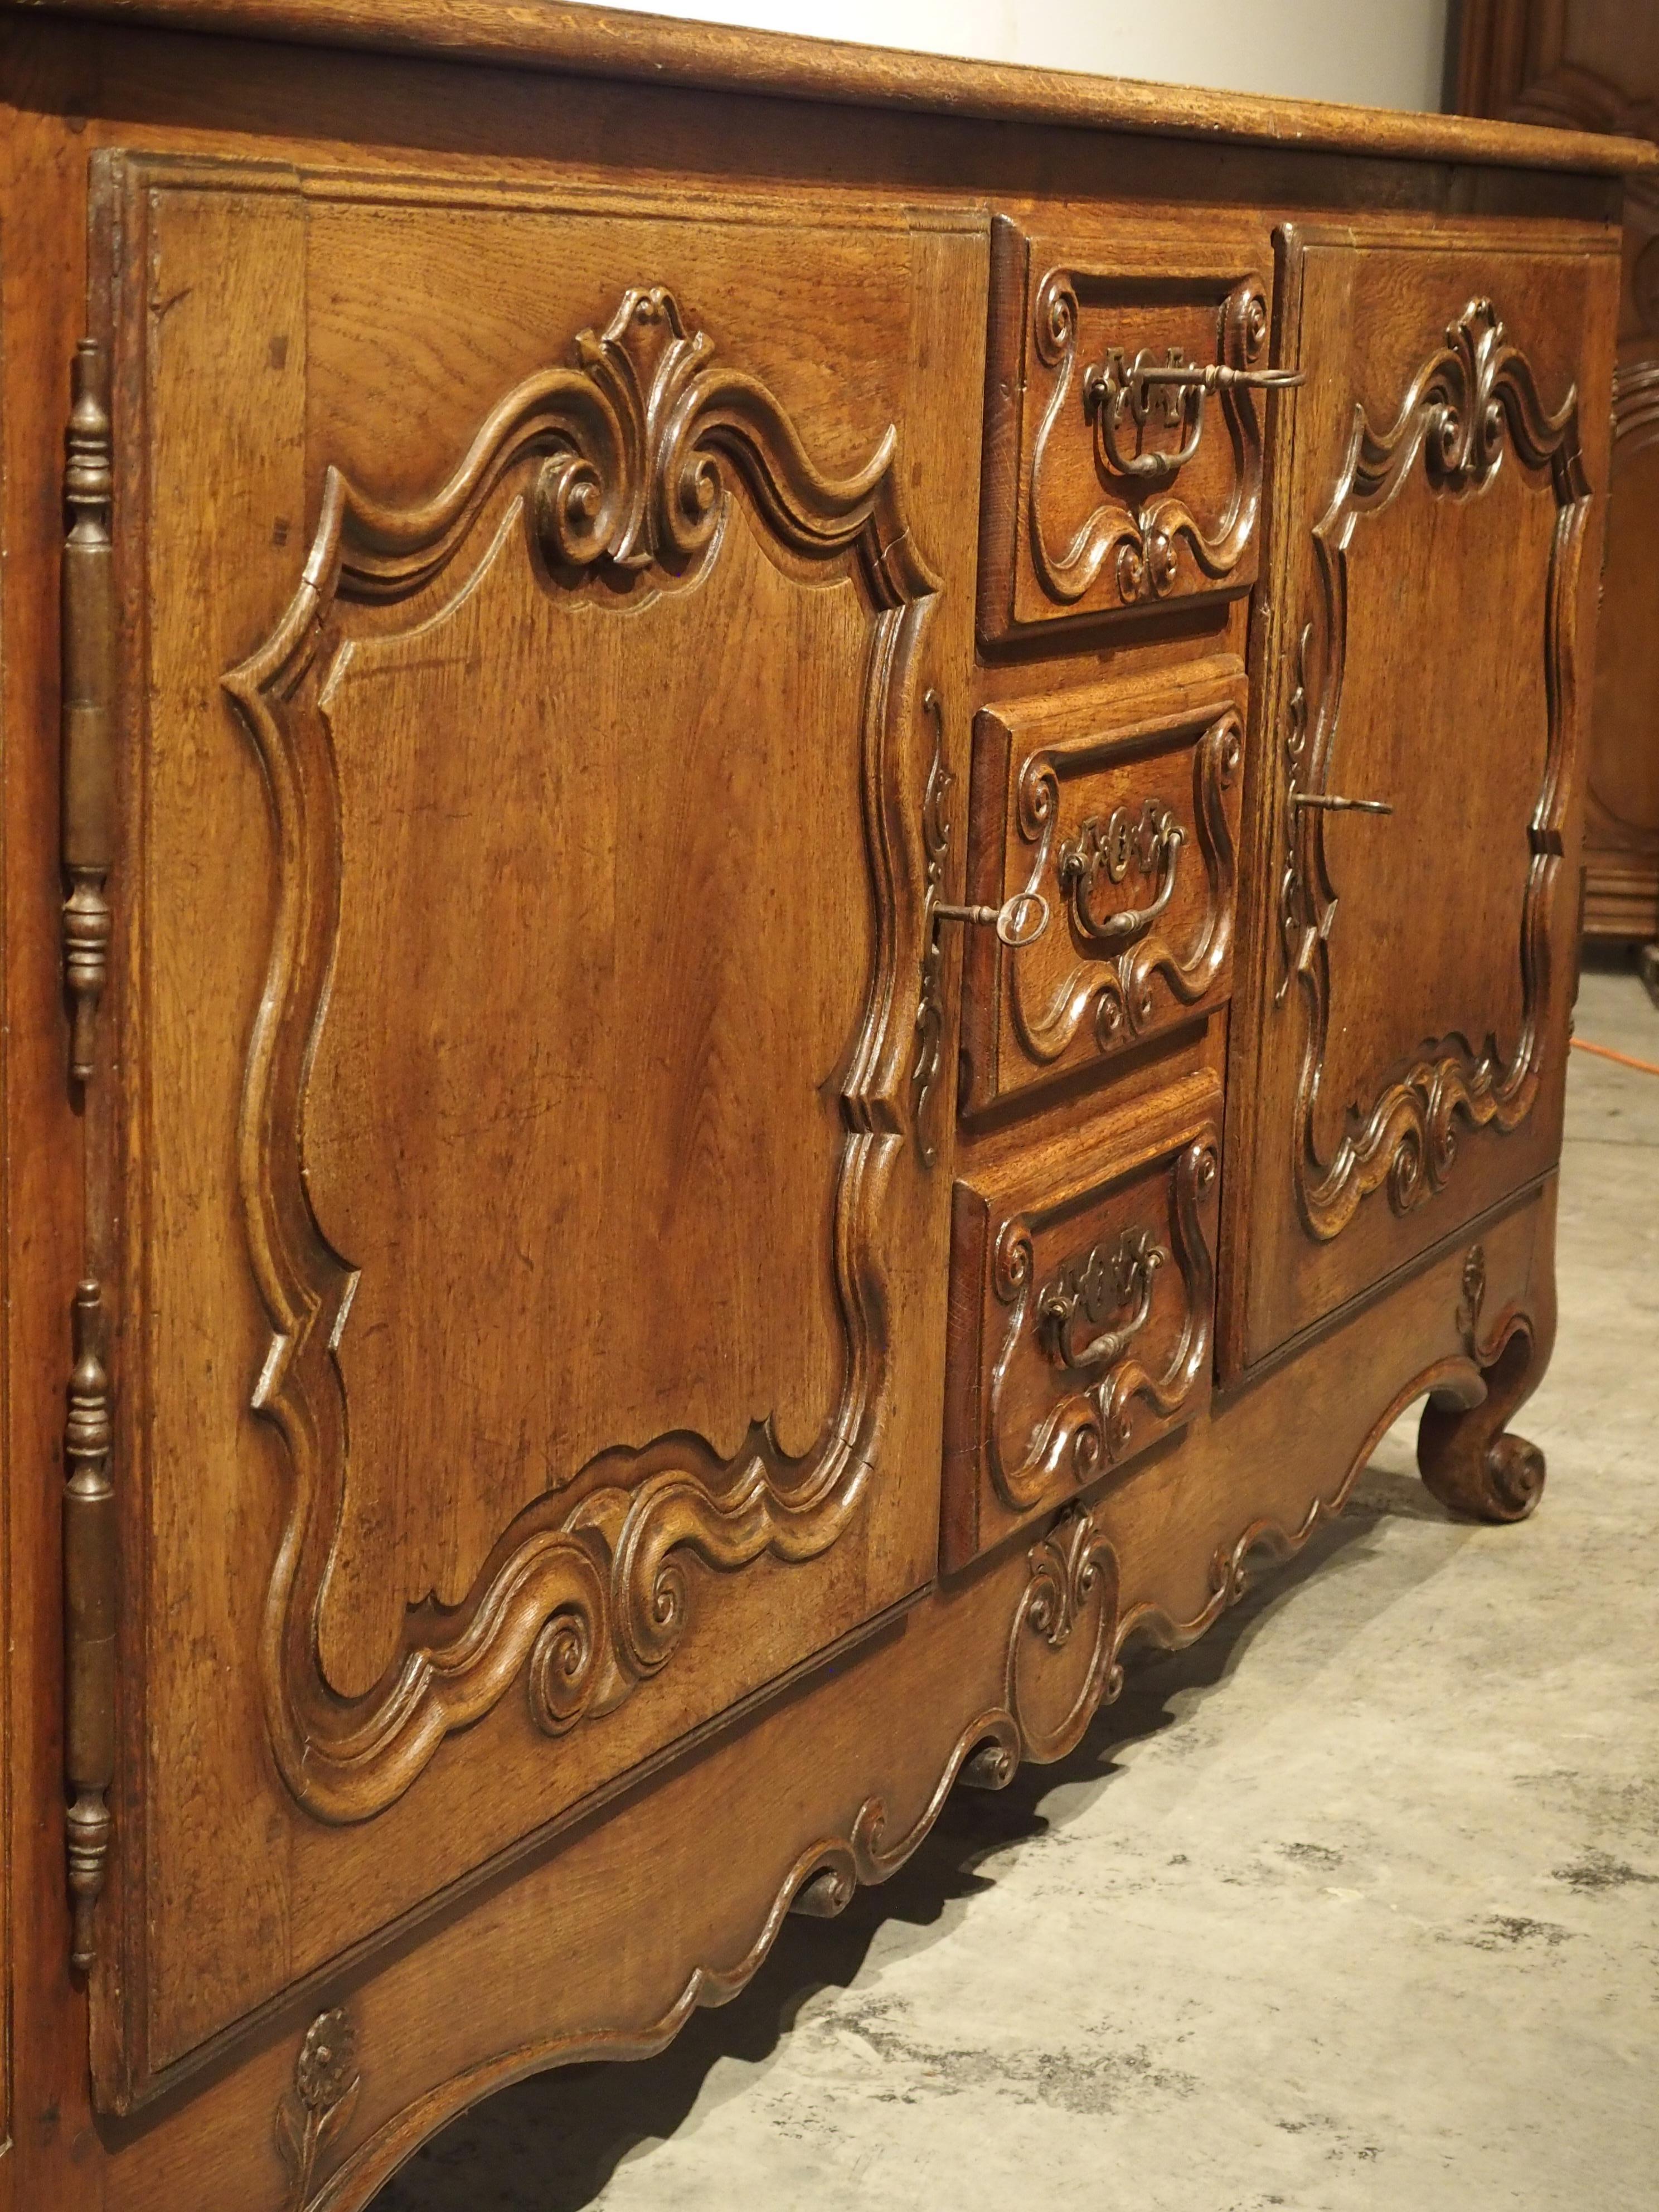 Hand-Carved 18th Century French Oak Buffet with Center Drawers from Lorraine